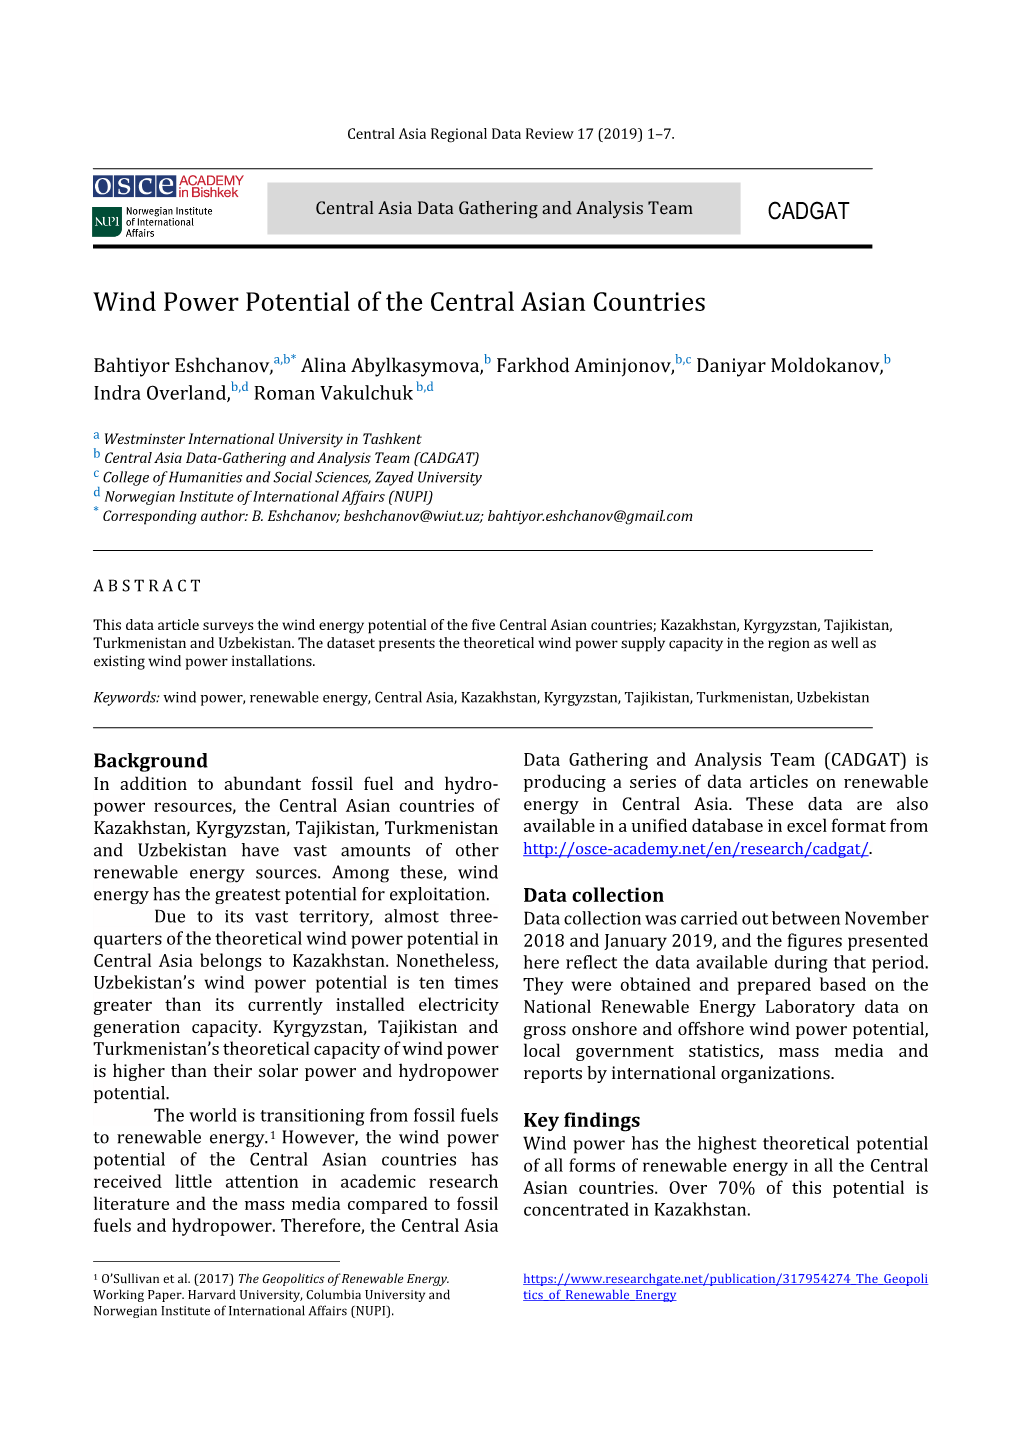 Wind Power Potential of the Central Asian Countries.Pdf